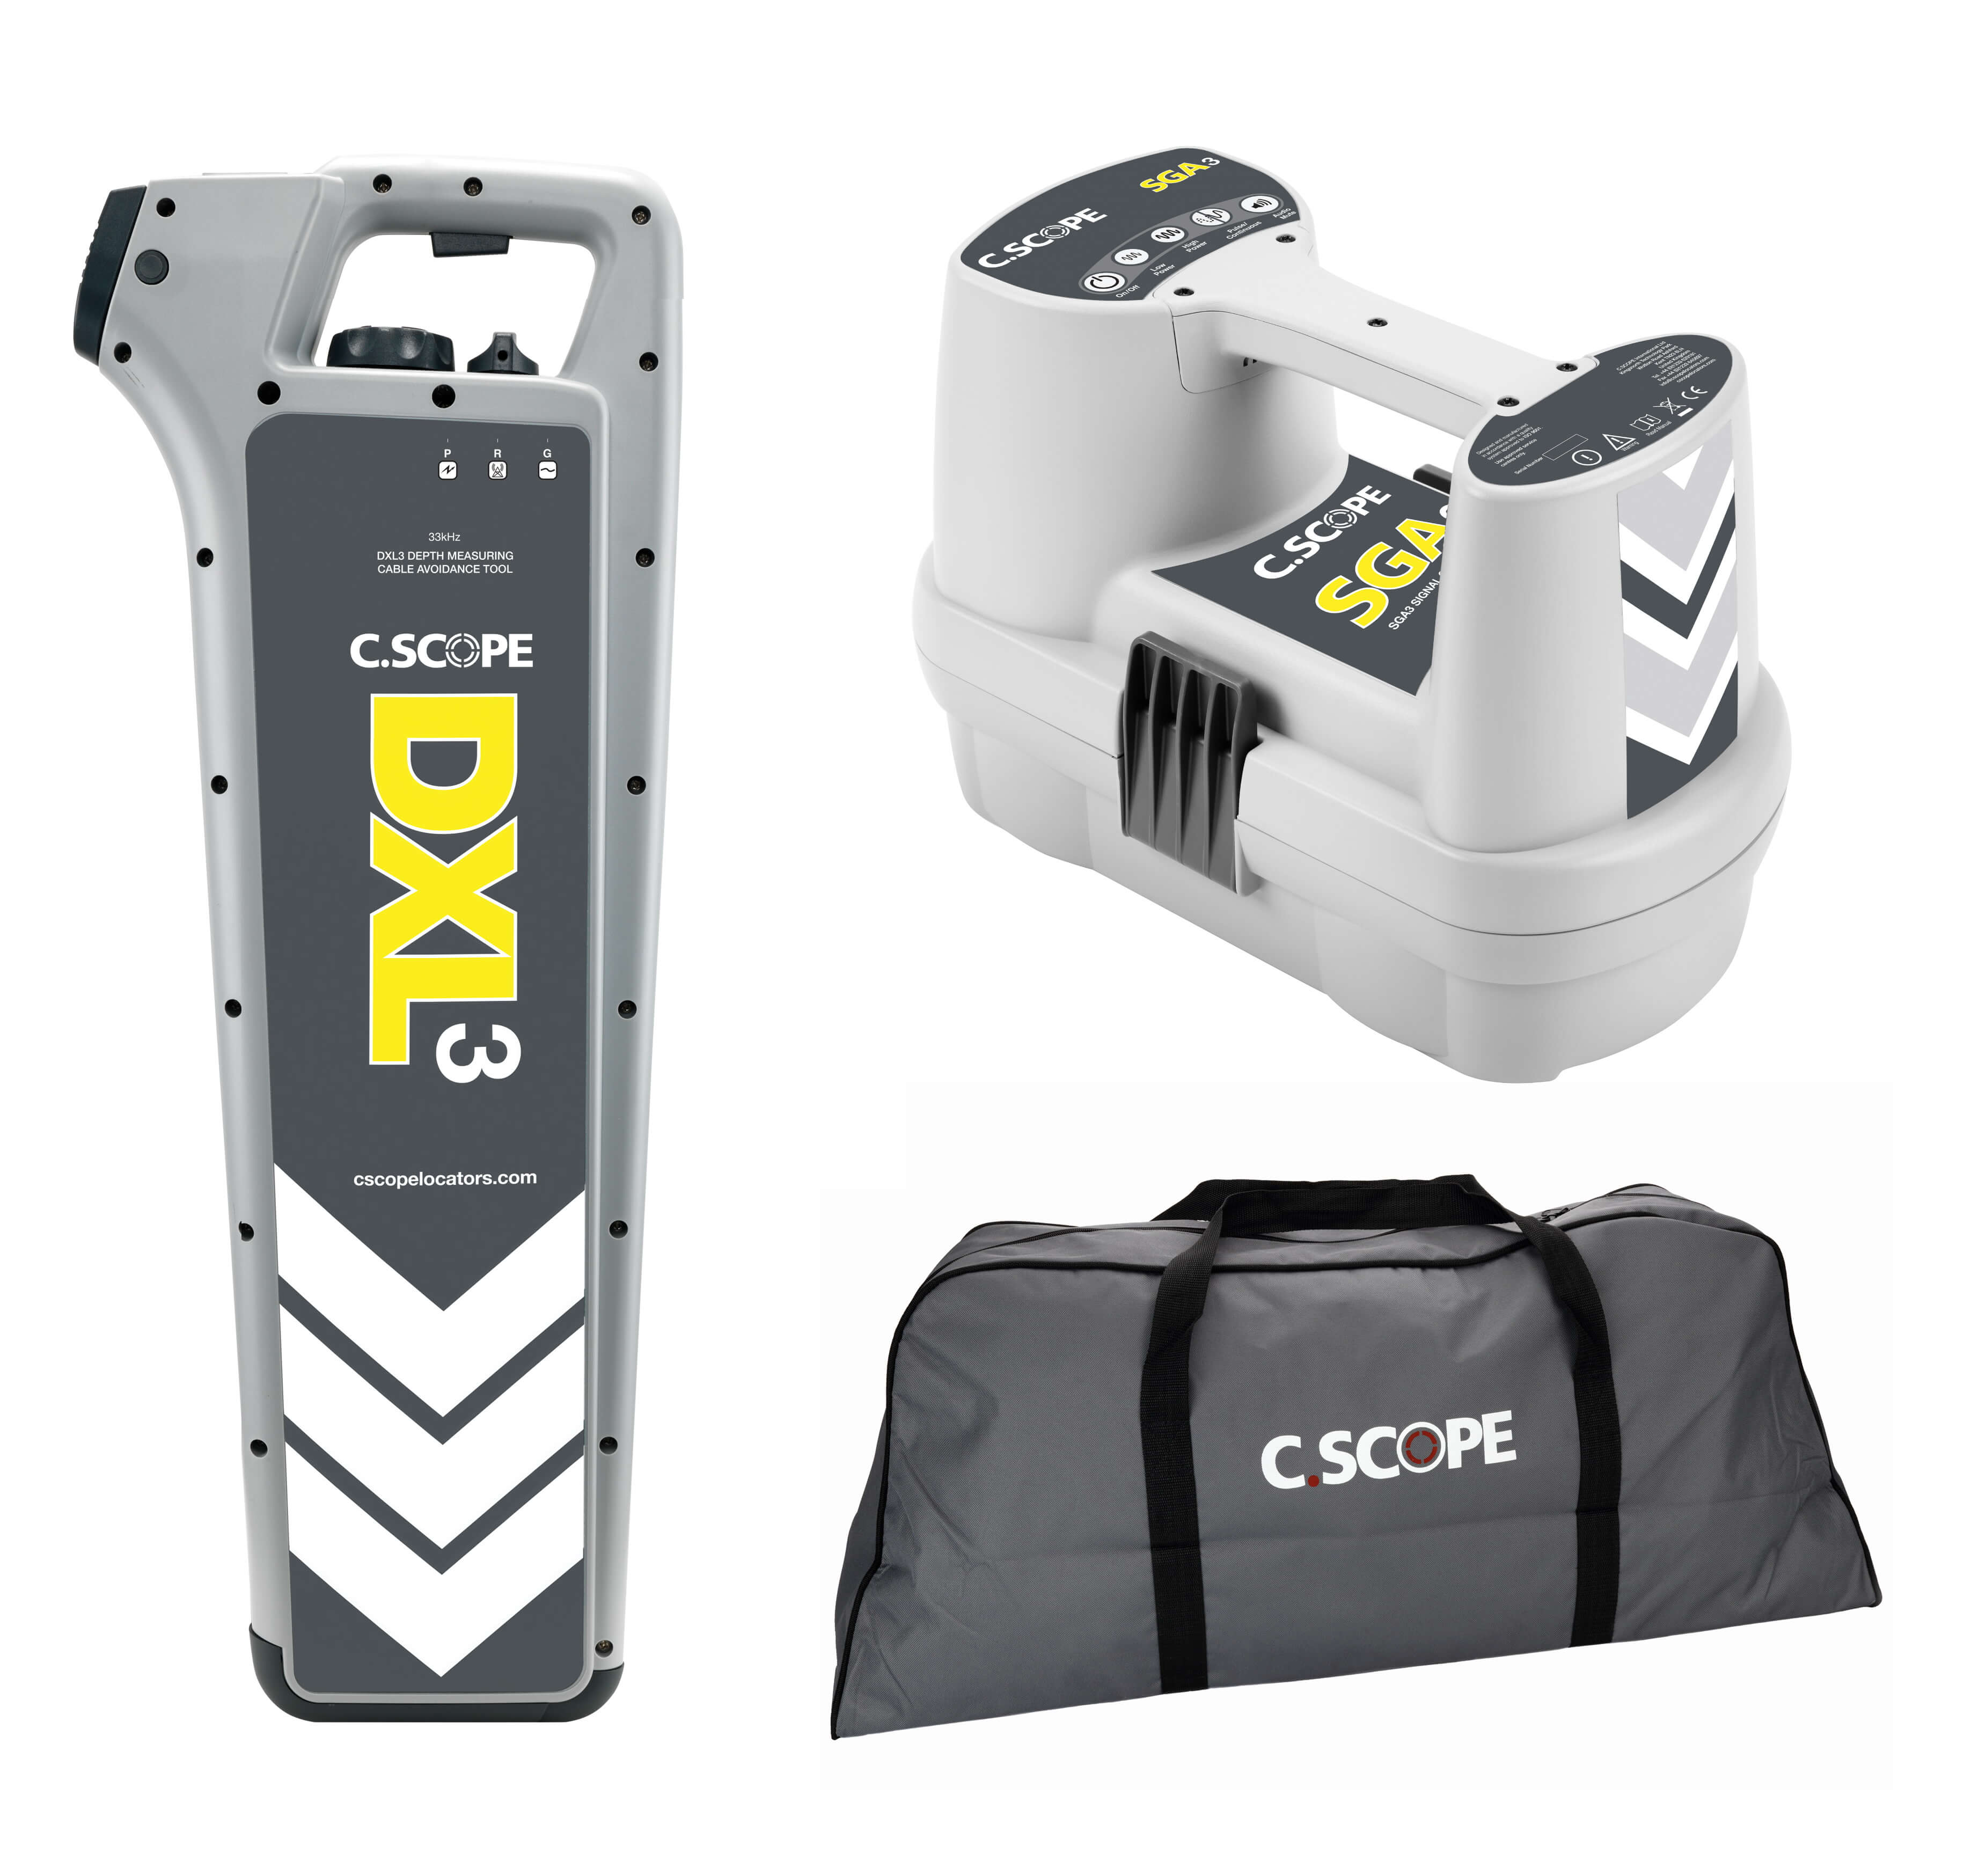 C.Scope DXL3 Top Value Cable Detector Kit with SGA3 and Soft bag - Cable Detector Calibration & Sales